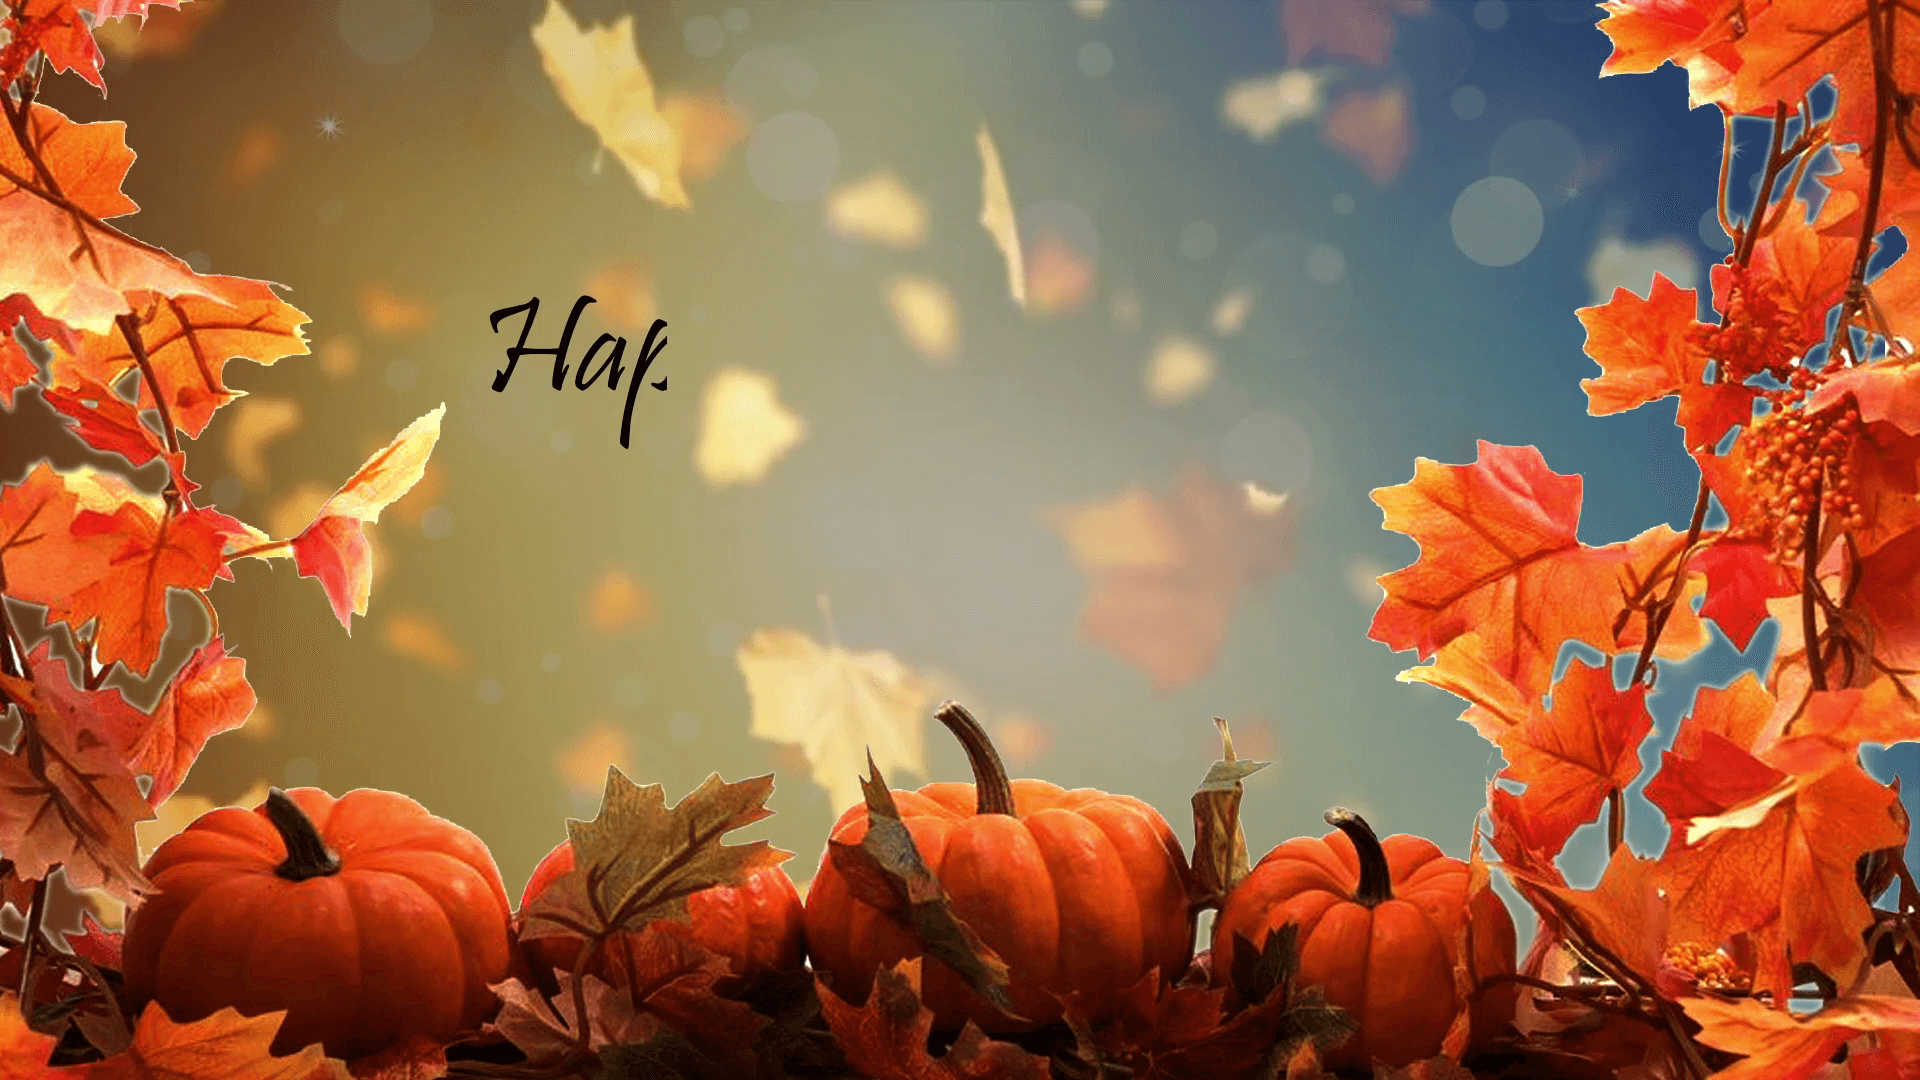 Thanksgiving Background Image, Wallpaper HD Picture